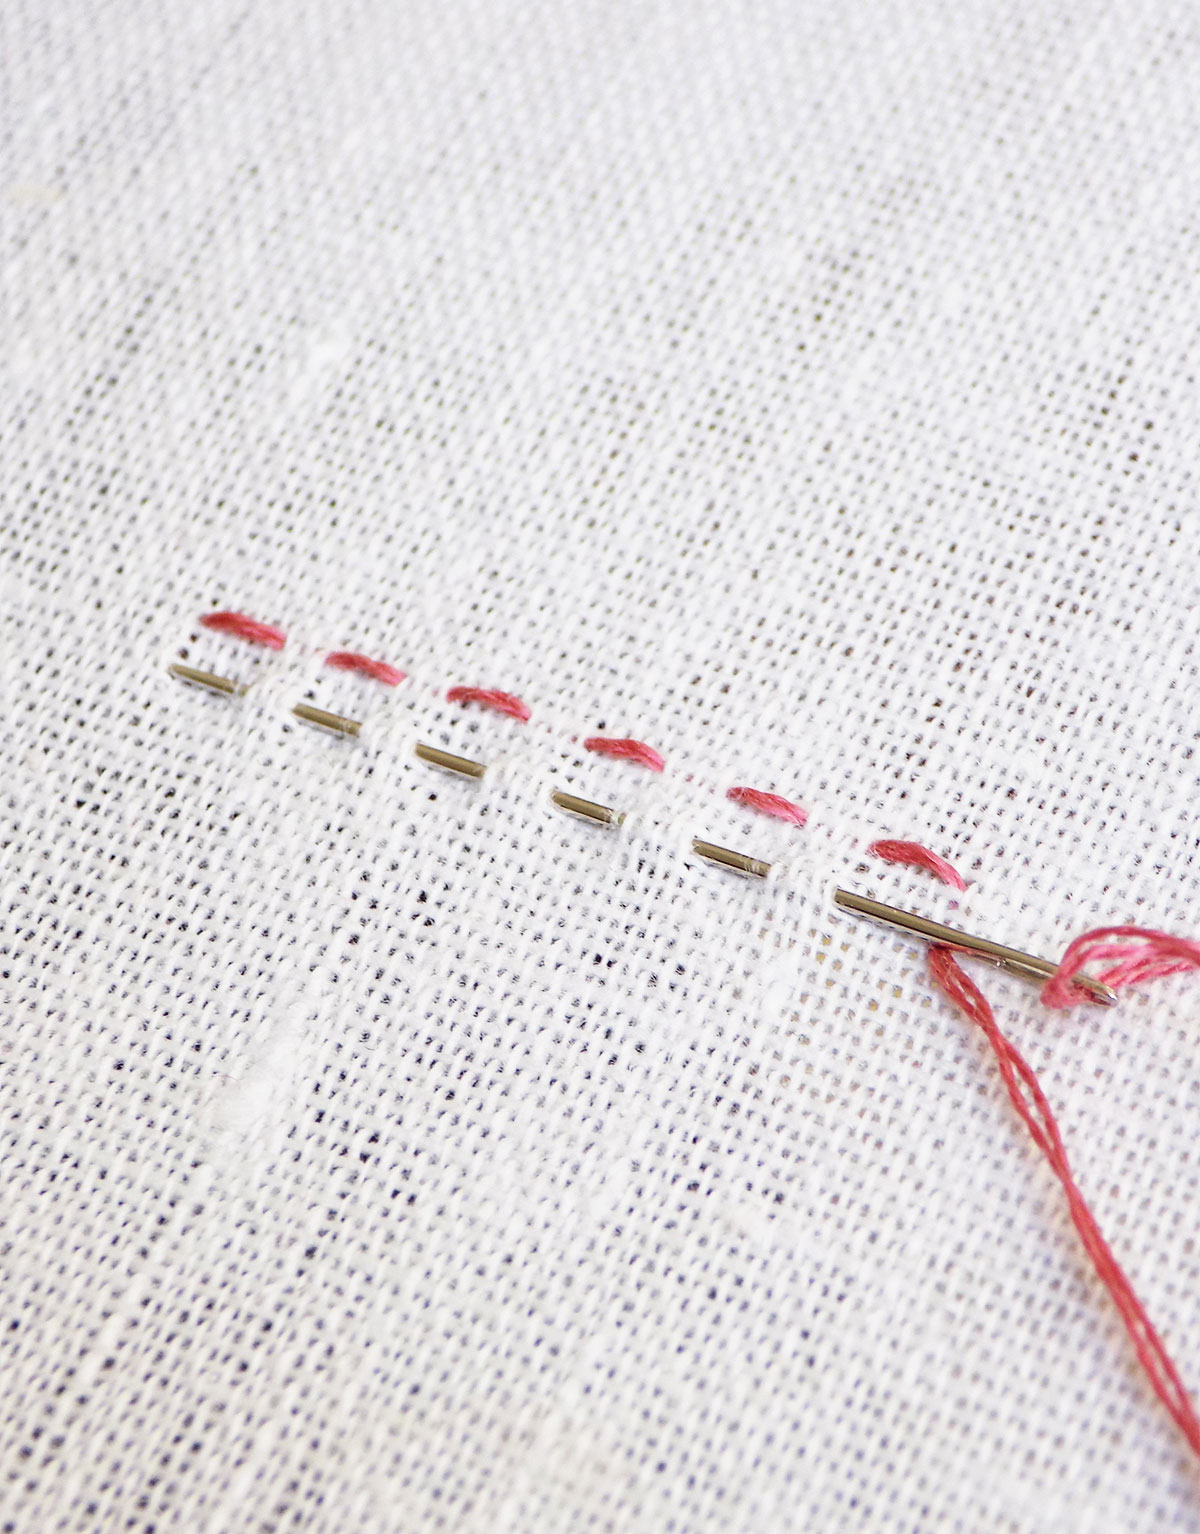 Darning Stitch In Hand Embroidery Stitches Tutorial (Step By Step & Video)